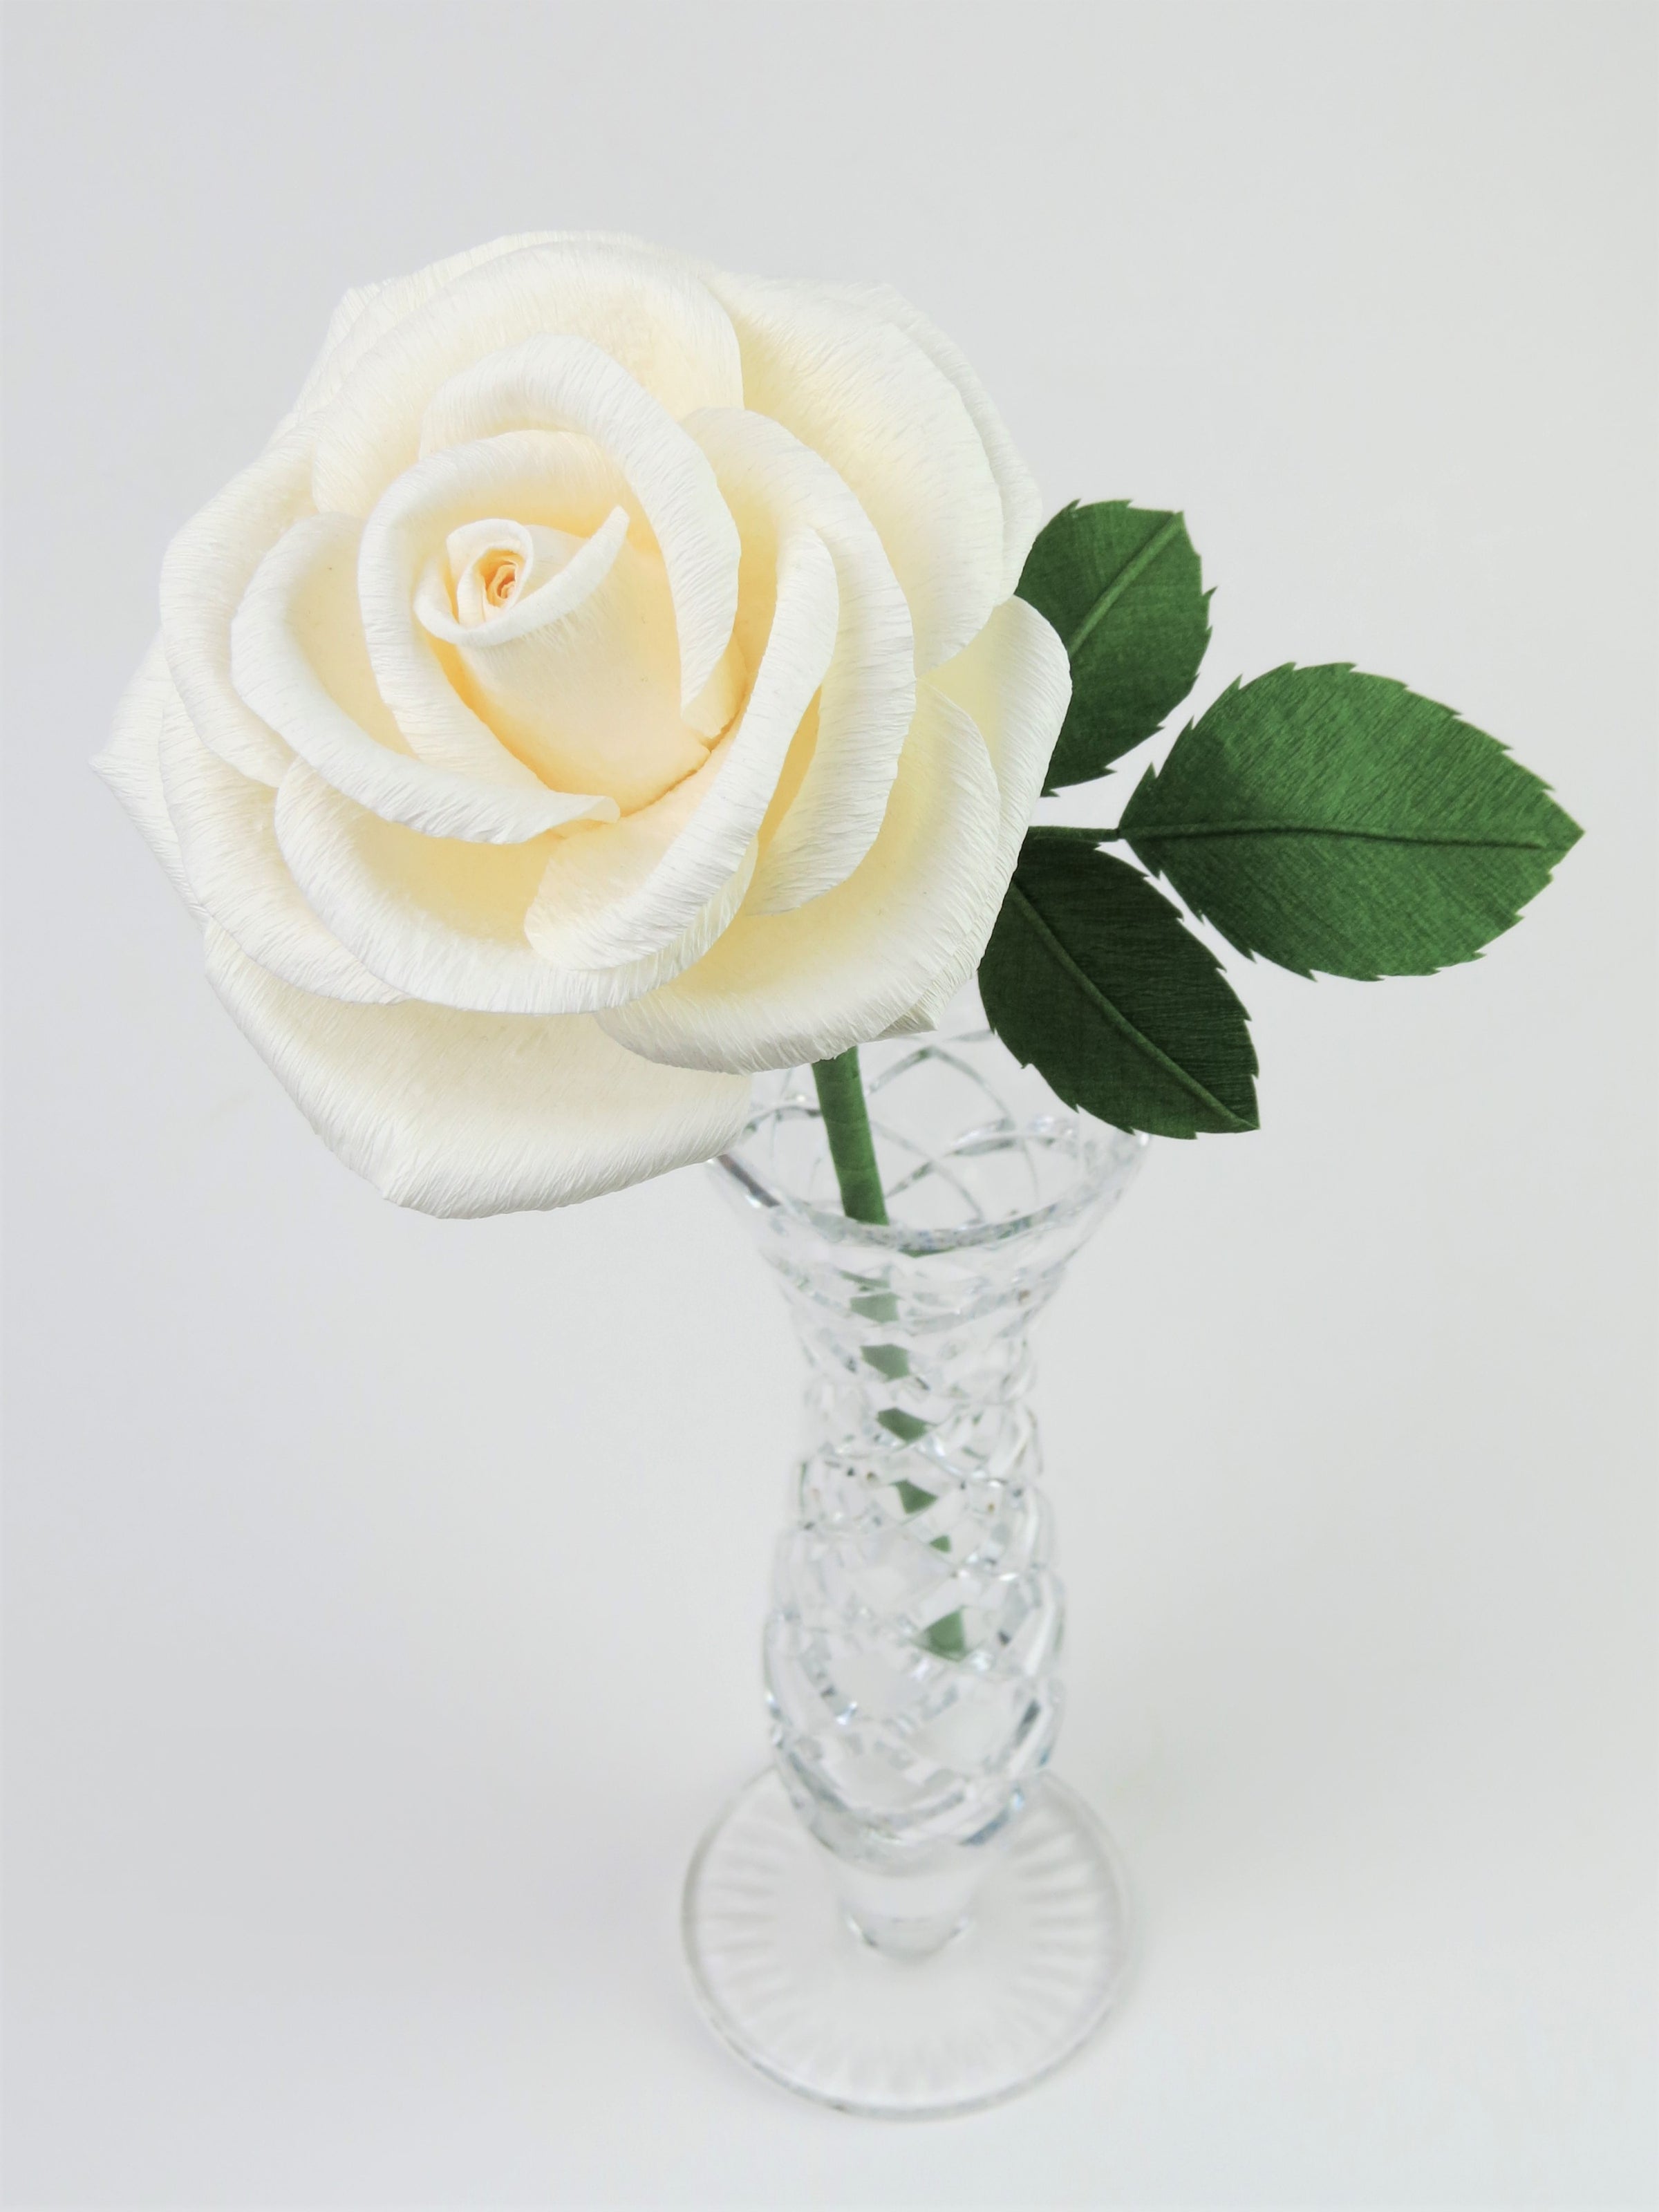 White paper rose with three leaves standing in a narrow glass vase against a light grey backdrop